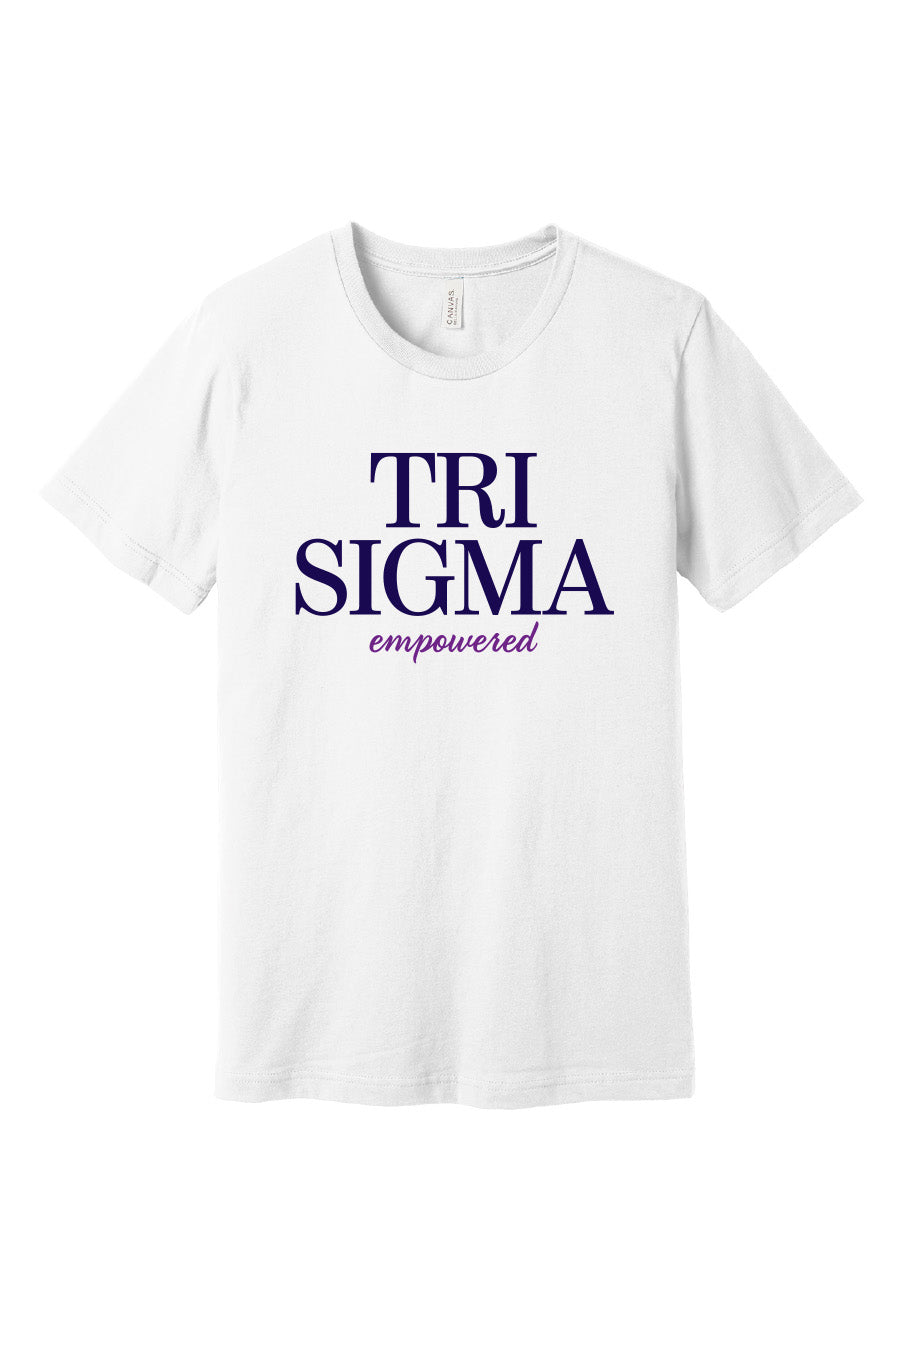 Load image into Gallery viewer, Tri Sigma Empowered Tee
